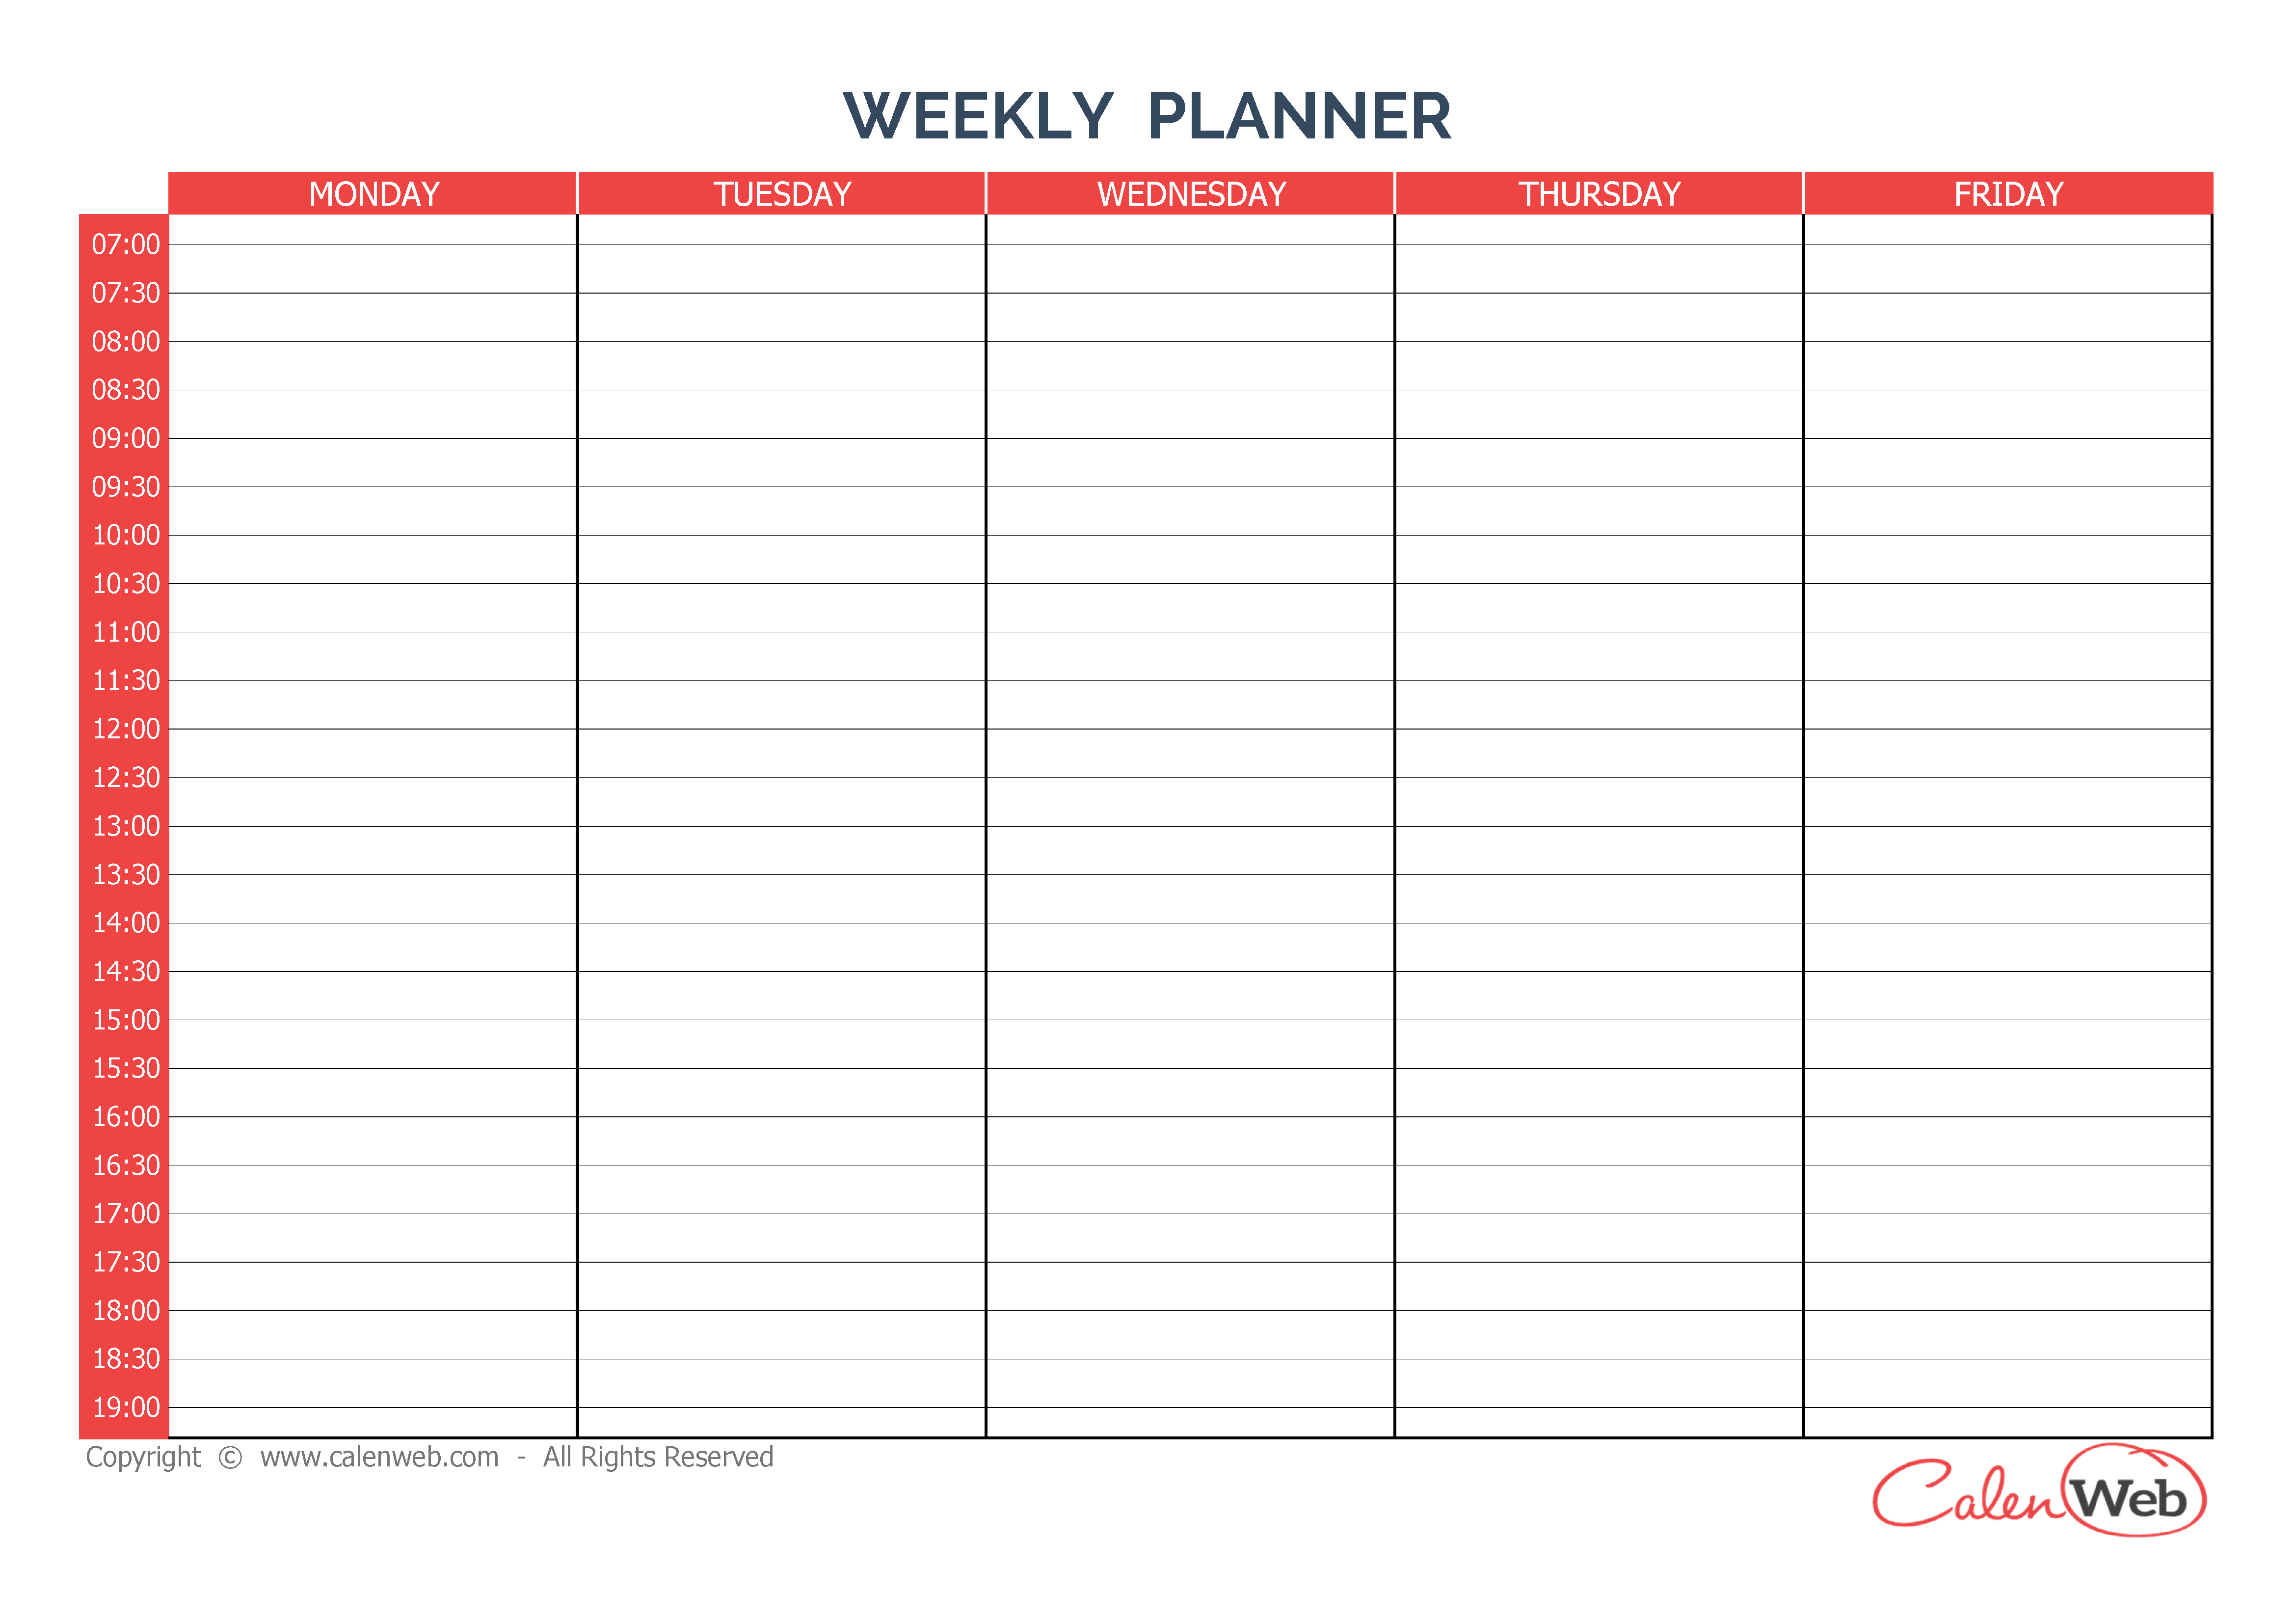 Weekly Planner 5 Days A Week Of 5 Days  Calenweb throughout 5 Days A Week Planner